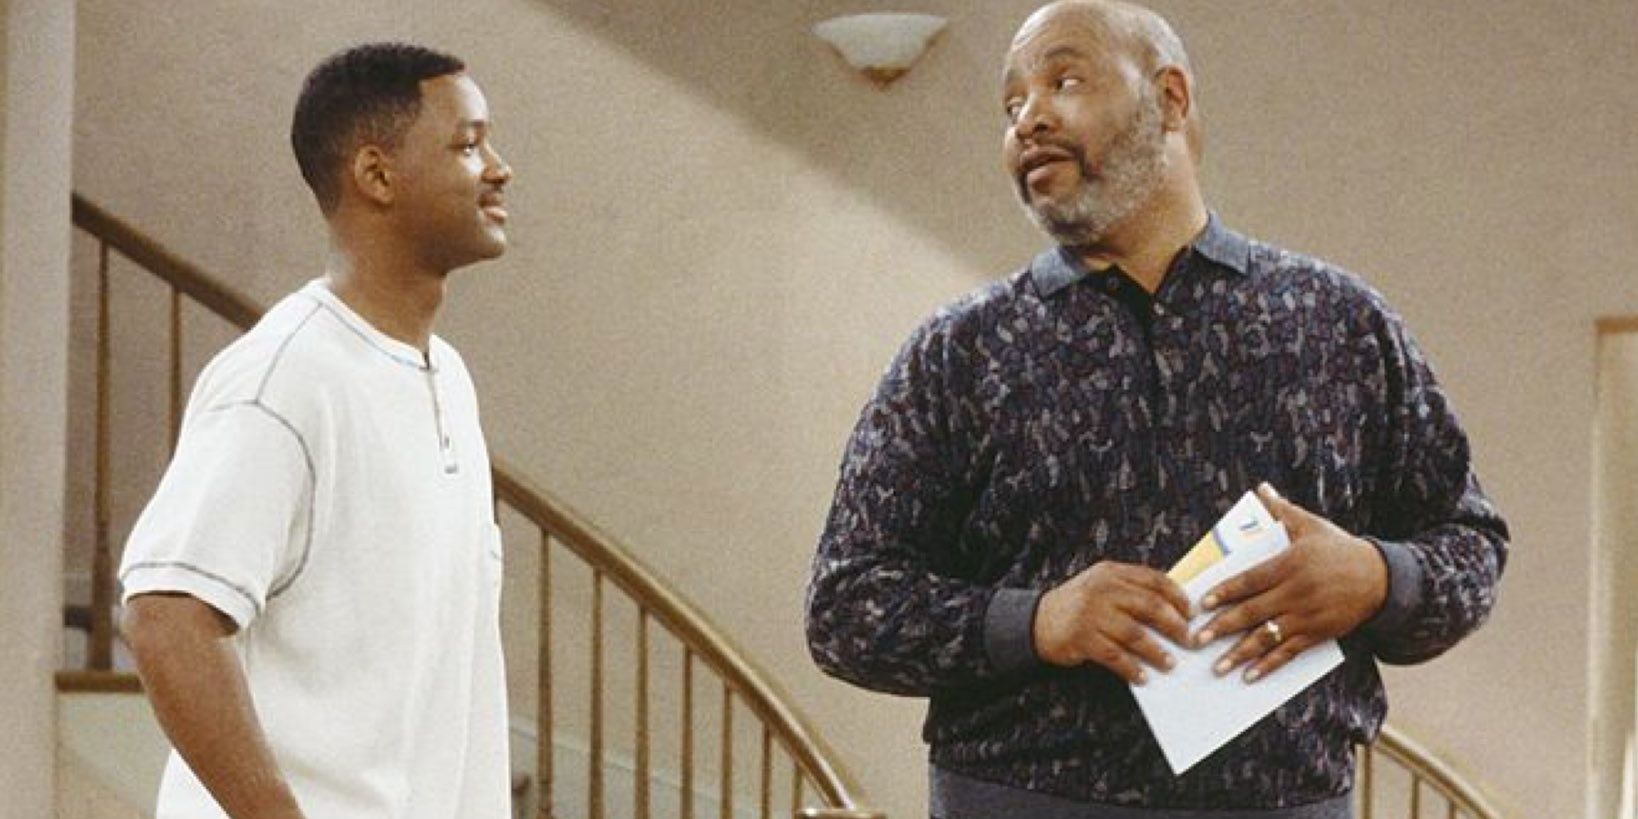 Phil announces his intention to sell the house in the finale of Fresh Prince